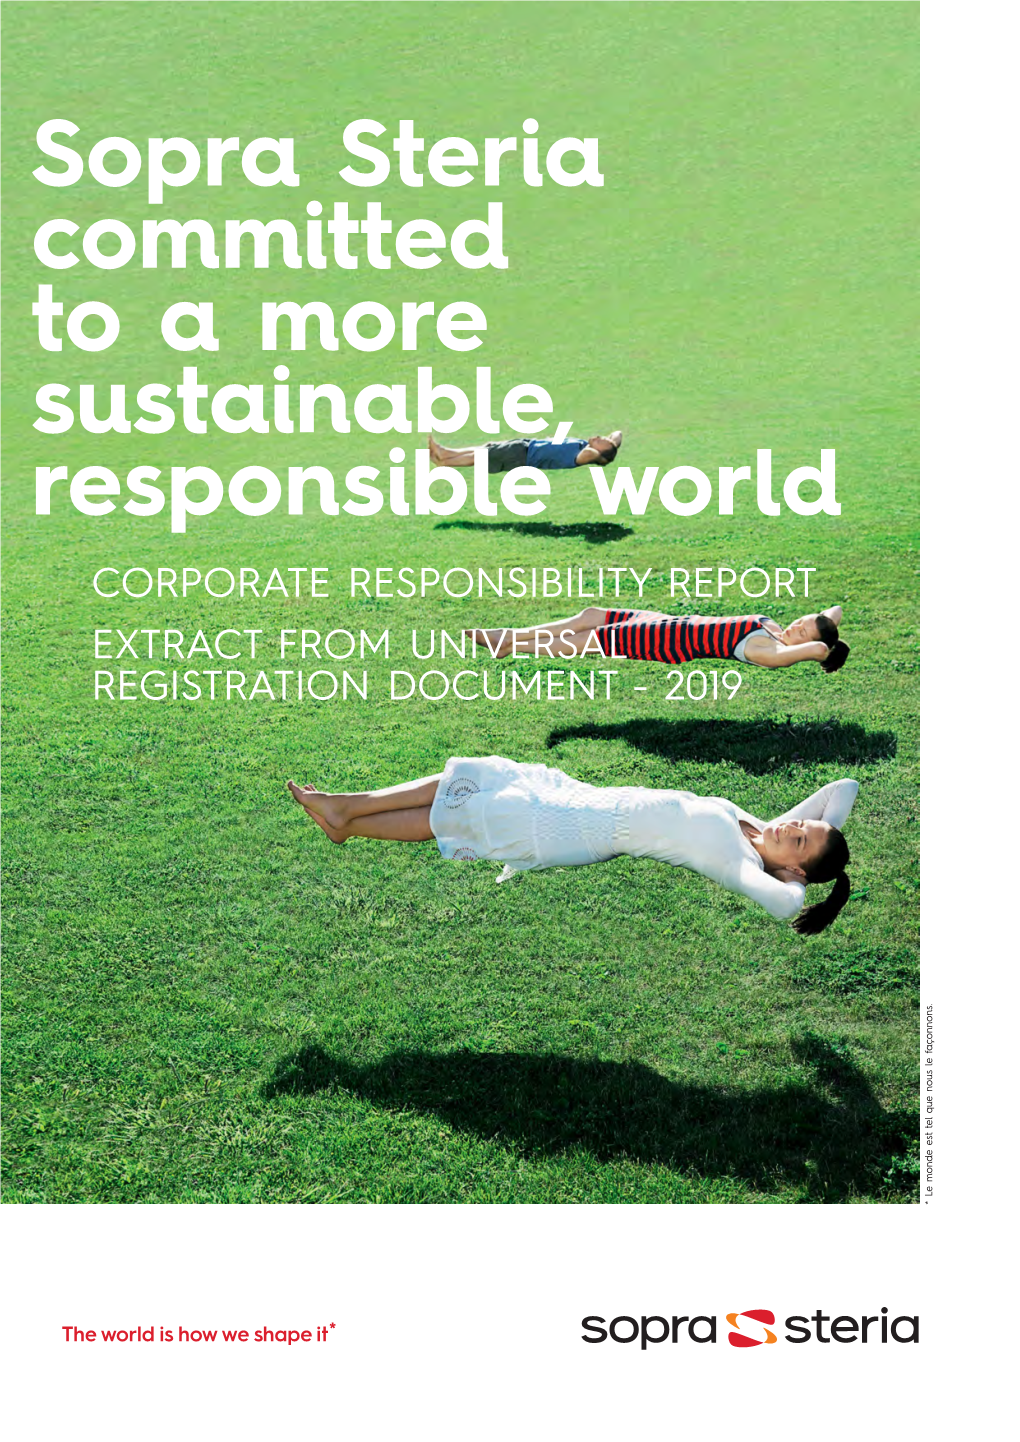 Sopra Steria Committed to a More Sustainable, Responsible World